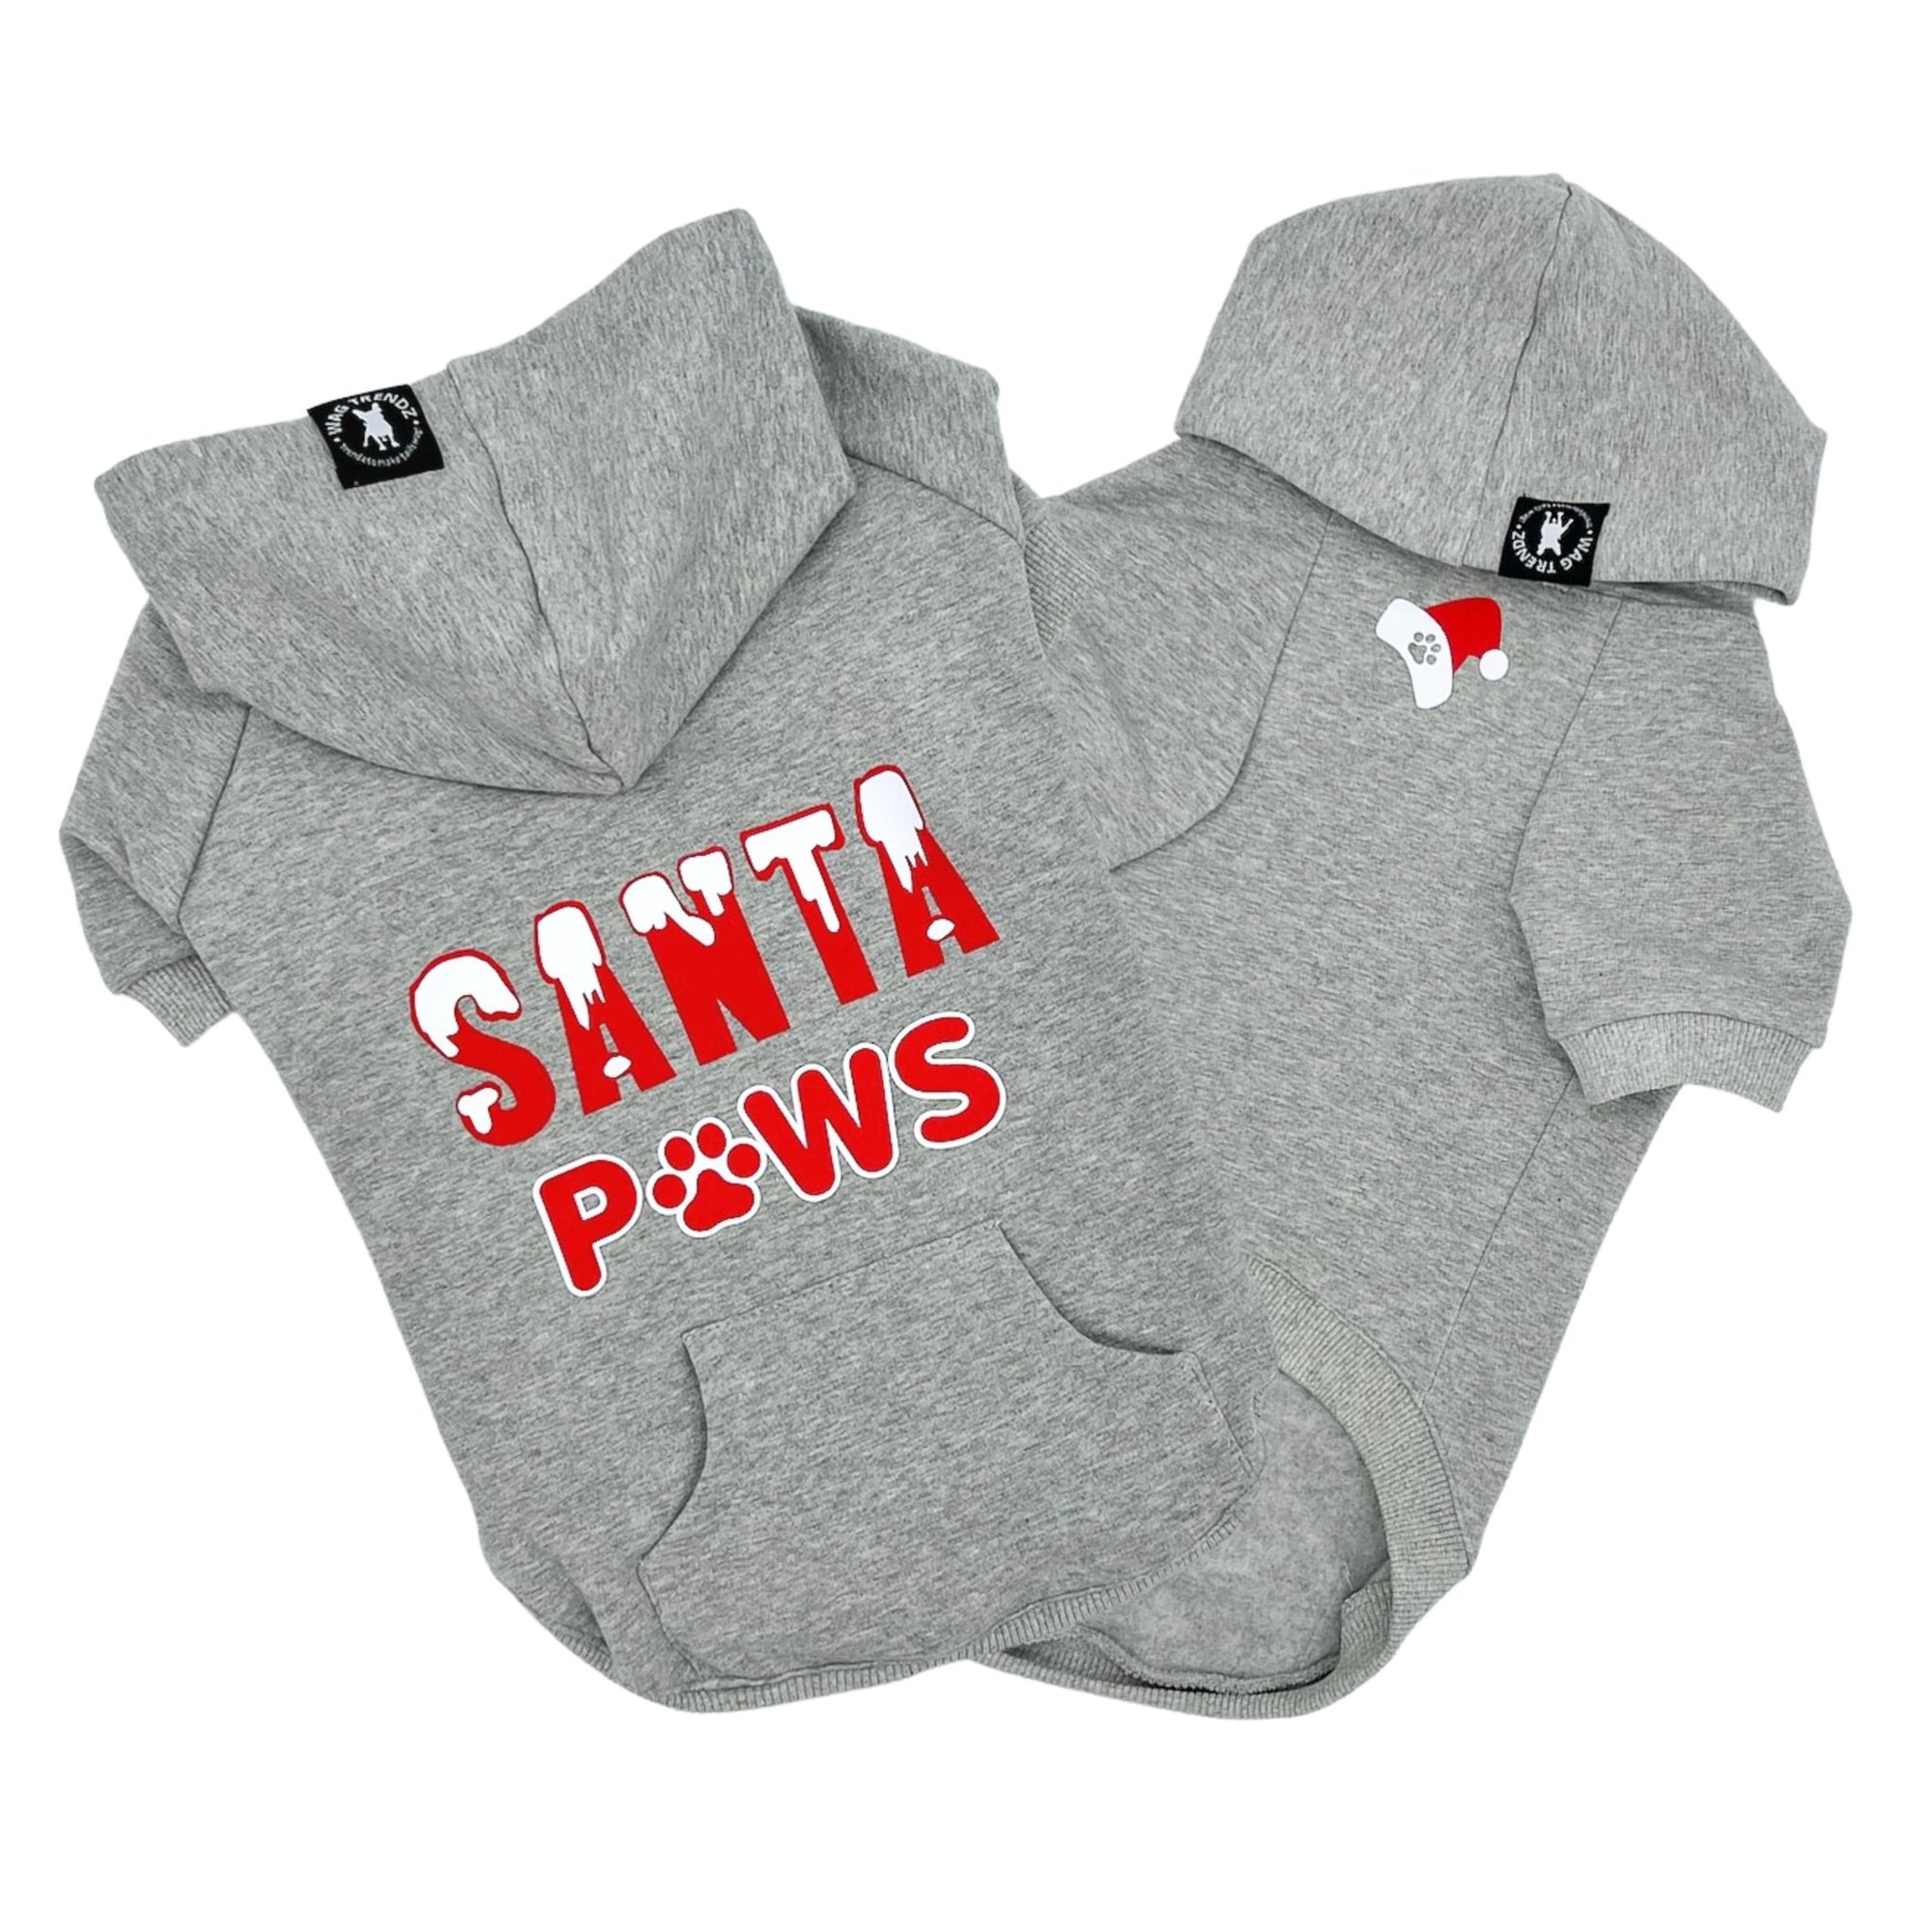 Dog Hoodie - Hoodies For Dogs - &quot;Santa Paws&quot; dog hoodie in gray - back view is snow capped red and white SANTA letters with paws in red and white spelled with a paw - front view with red and white Santa hat emoji with black paw print- against solid white background - Wag Trendz